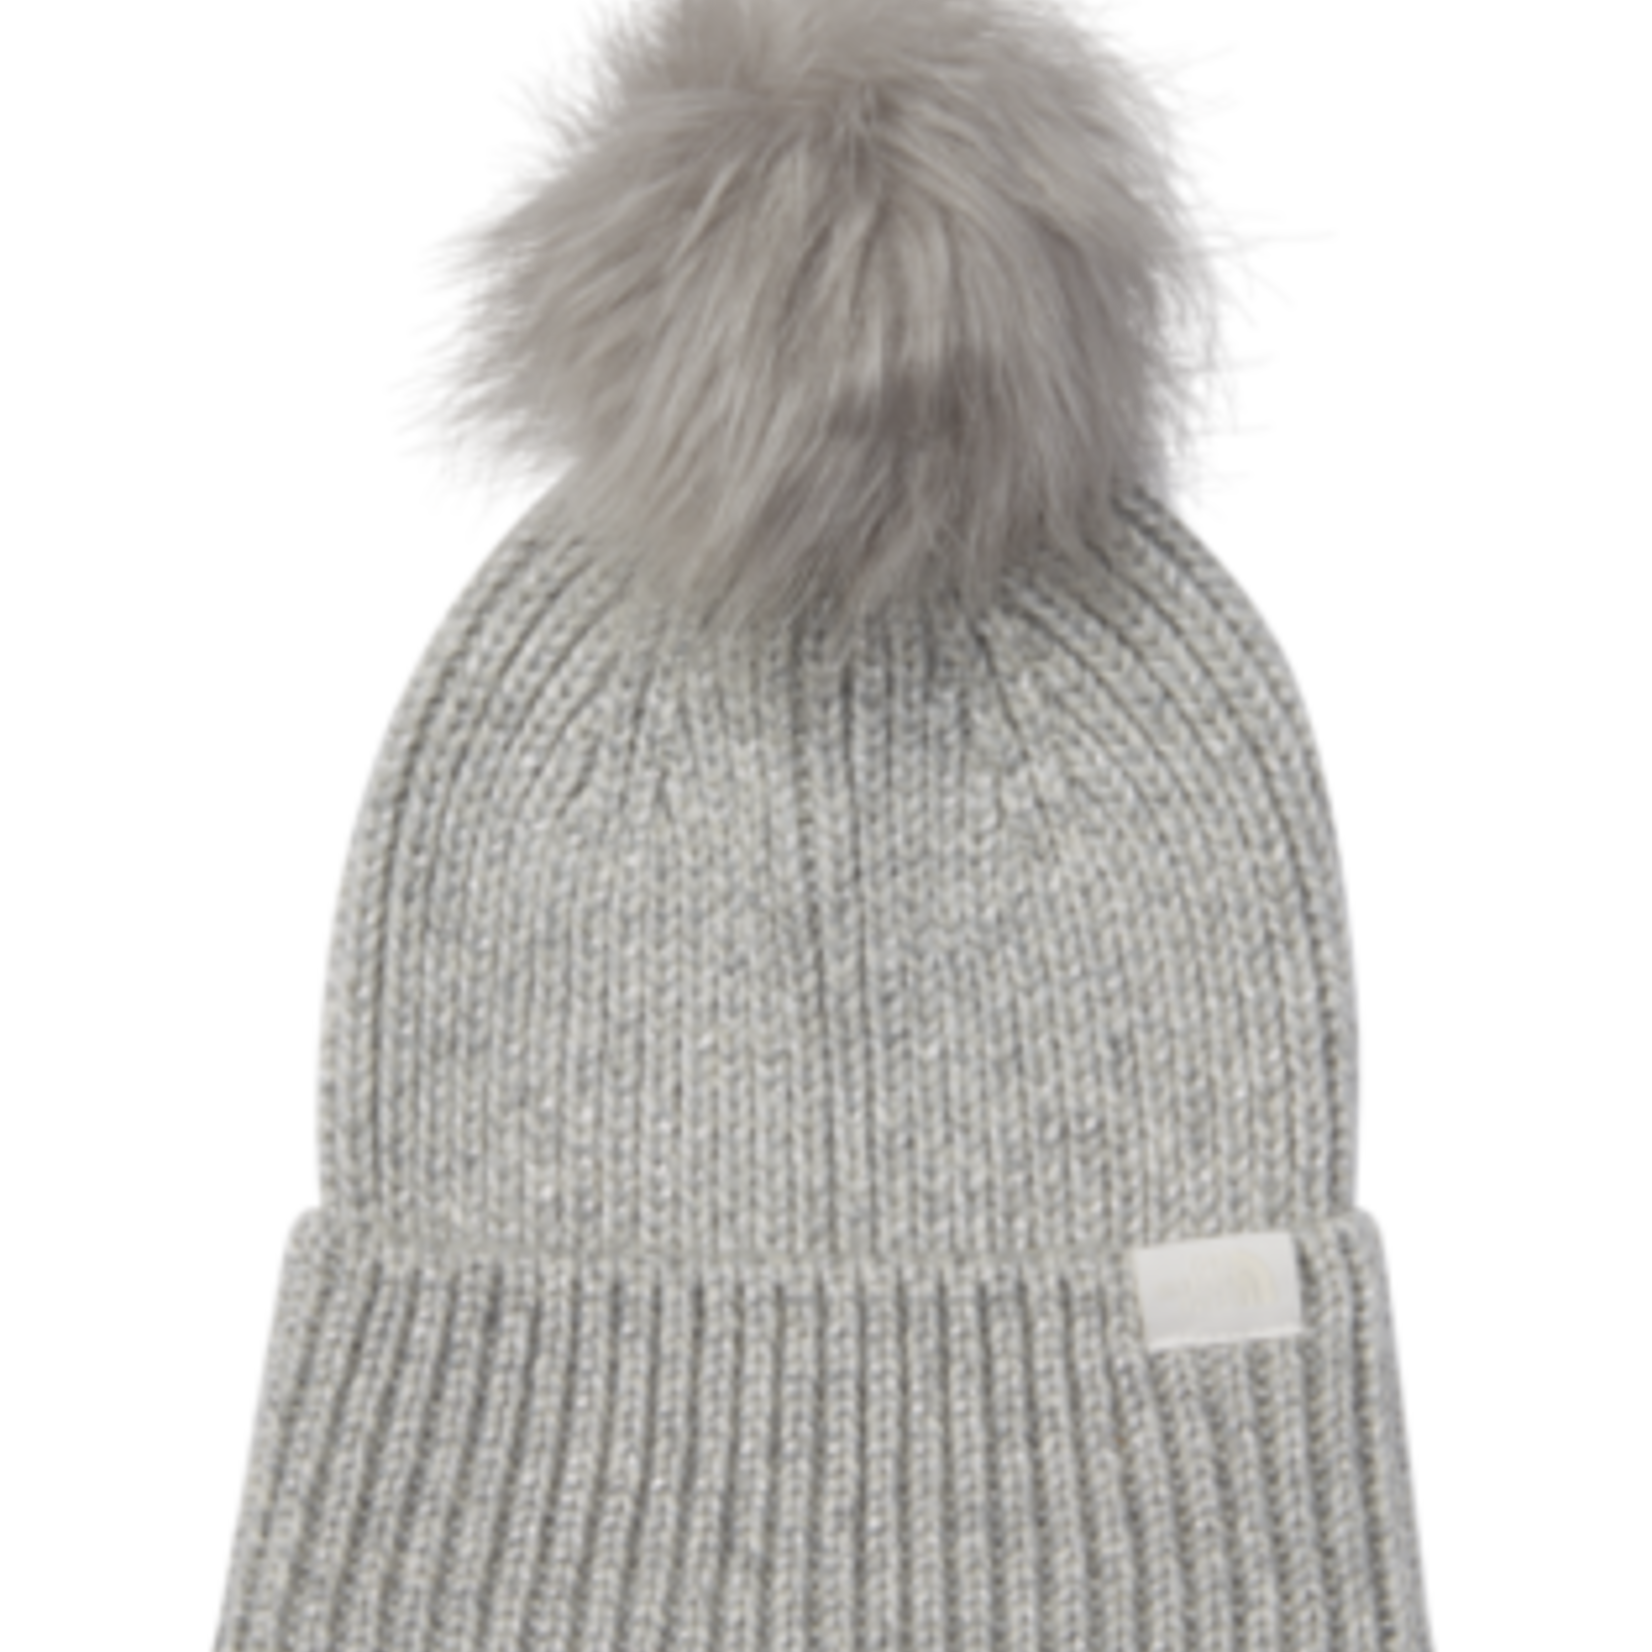 The North Face The North Face Toque, Airspun Pom Beanie, Ladies, OS